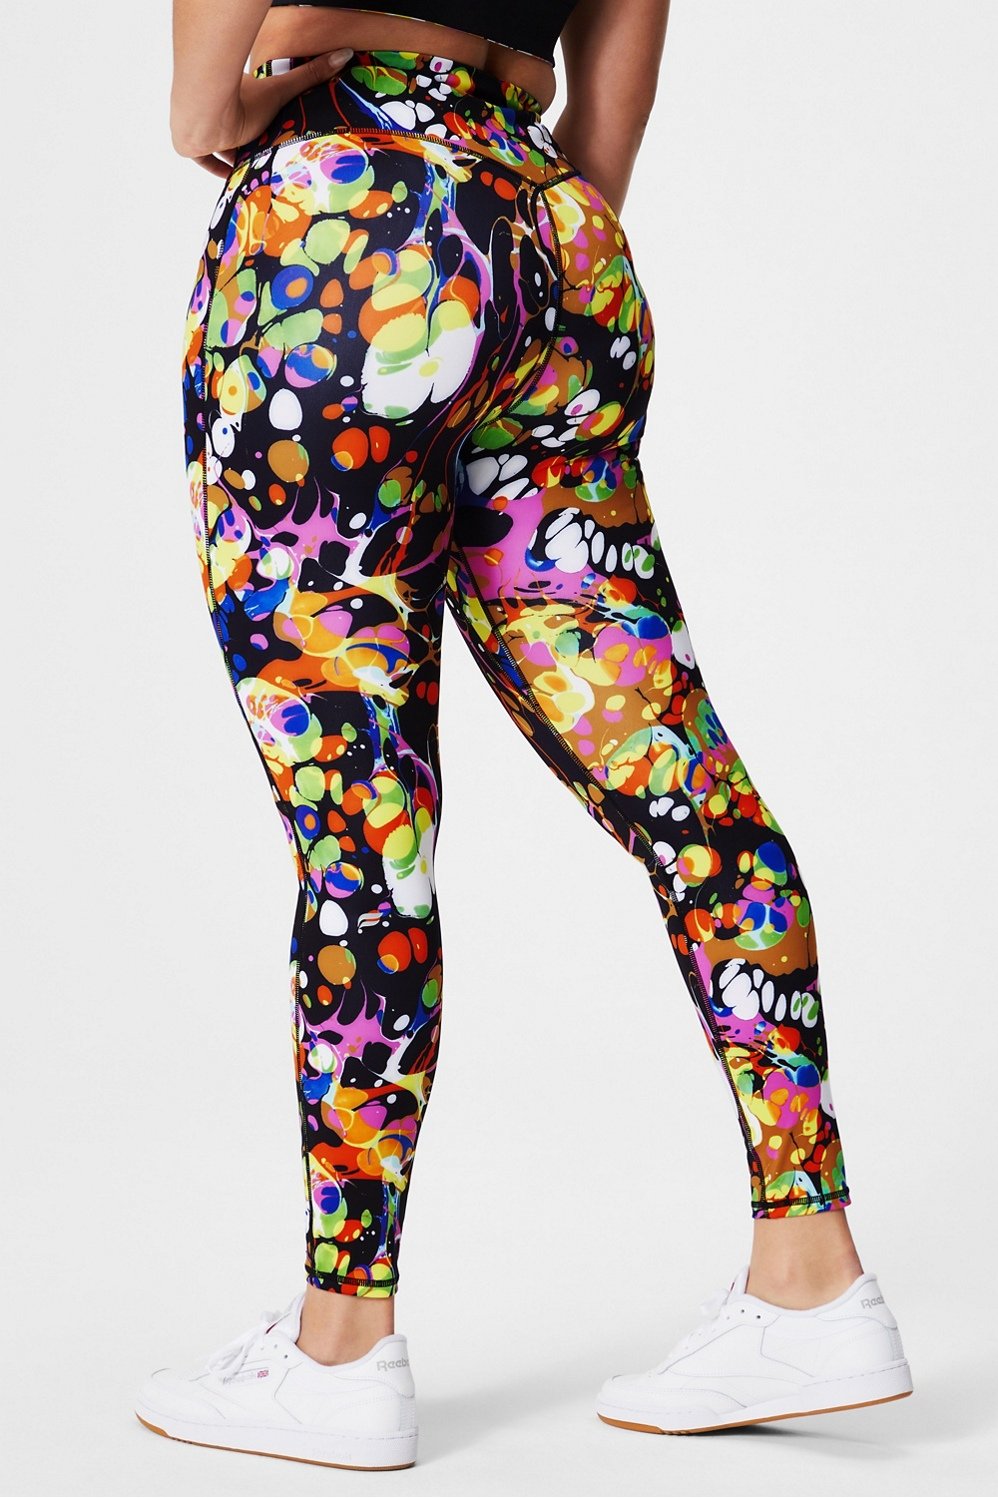 Anywhere Motion365® High-Waisted Legging - Fabletics Canada